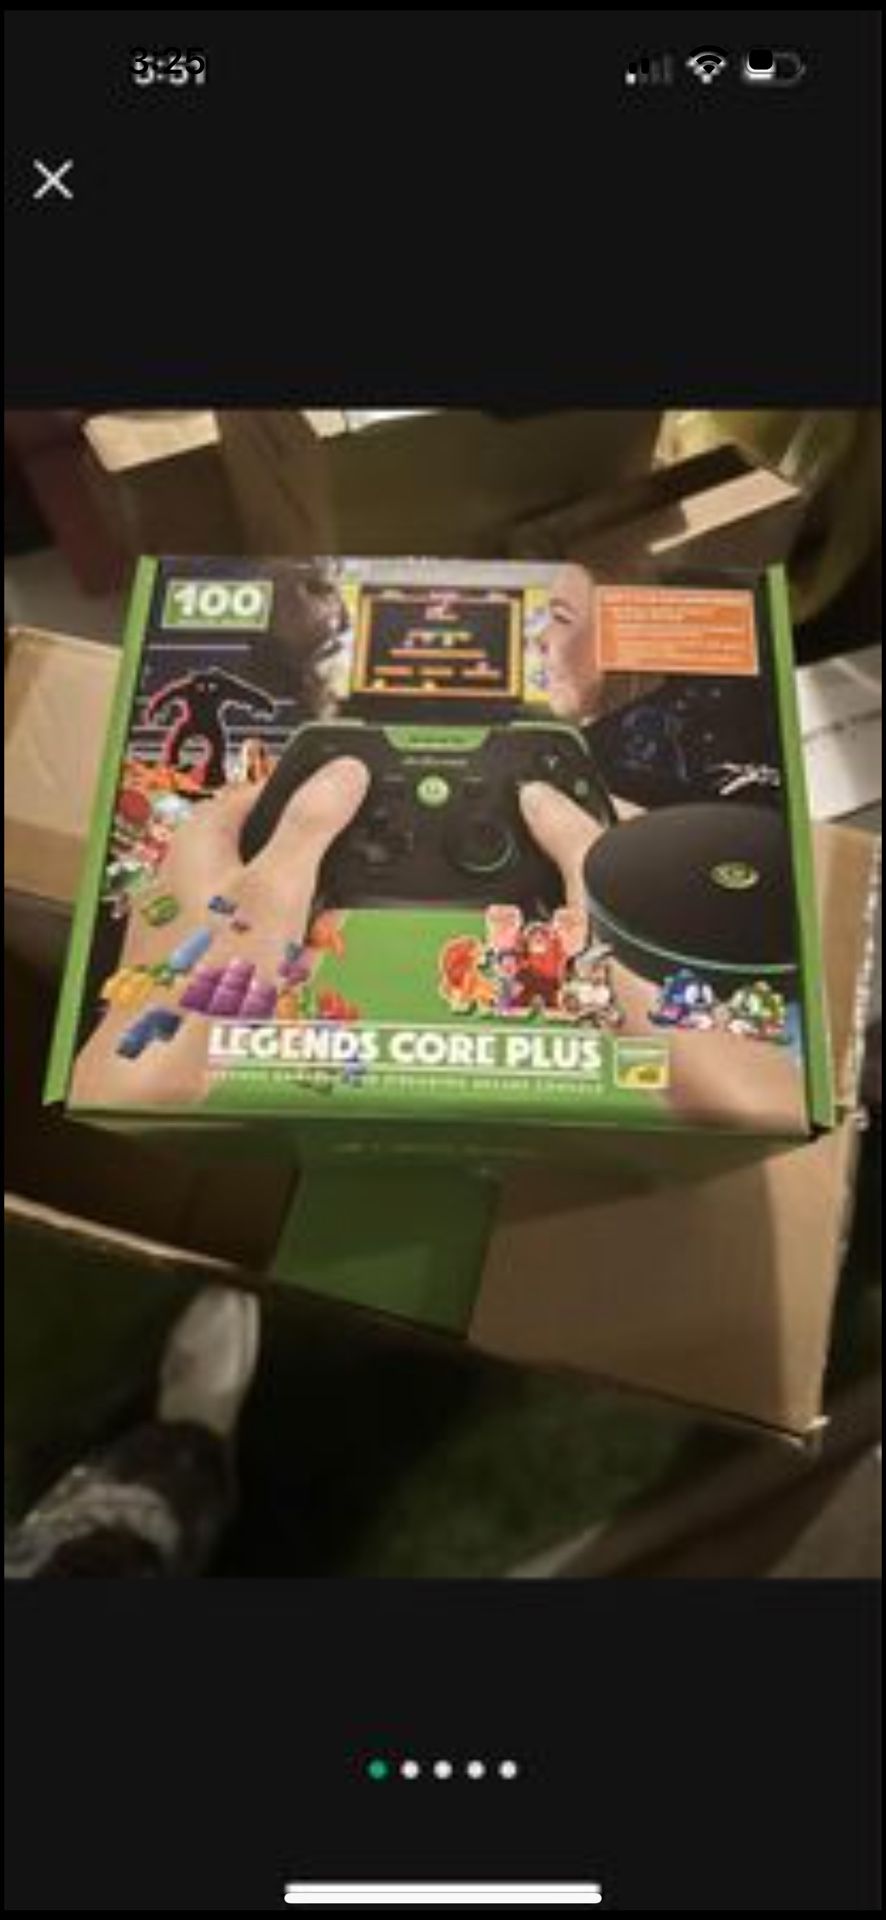 Legends Core Plus Arcade system New In Box 100+ Games